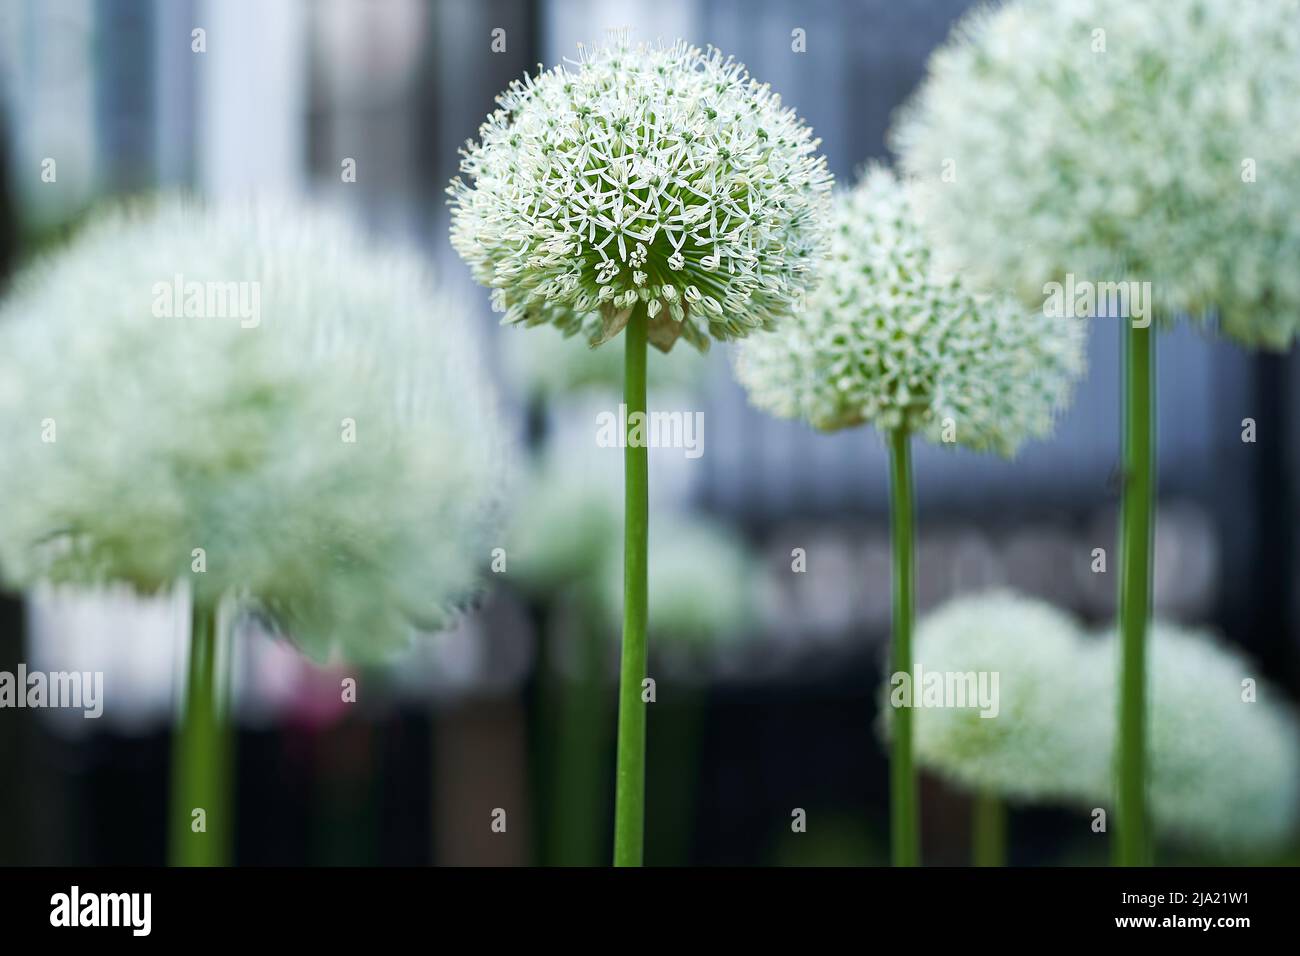 Selective focus on one ornamental onion in gardened of allium , a white bloom with city in background Stock Photo